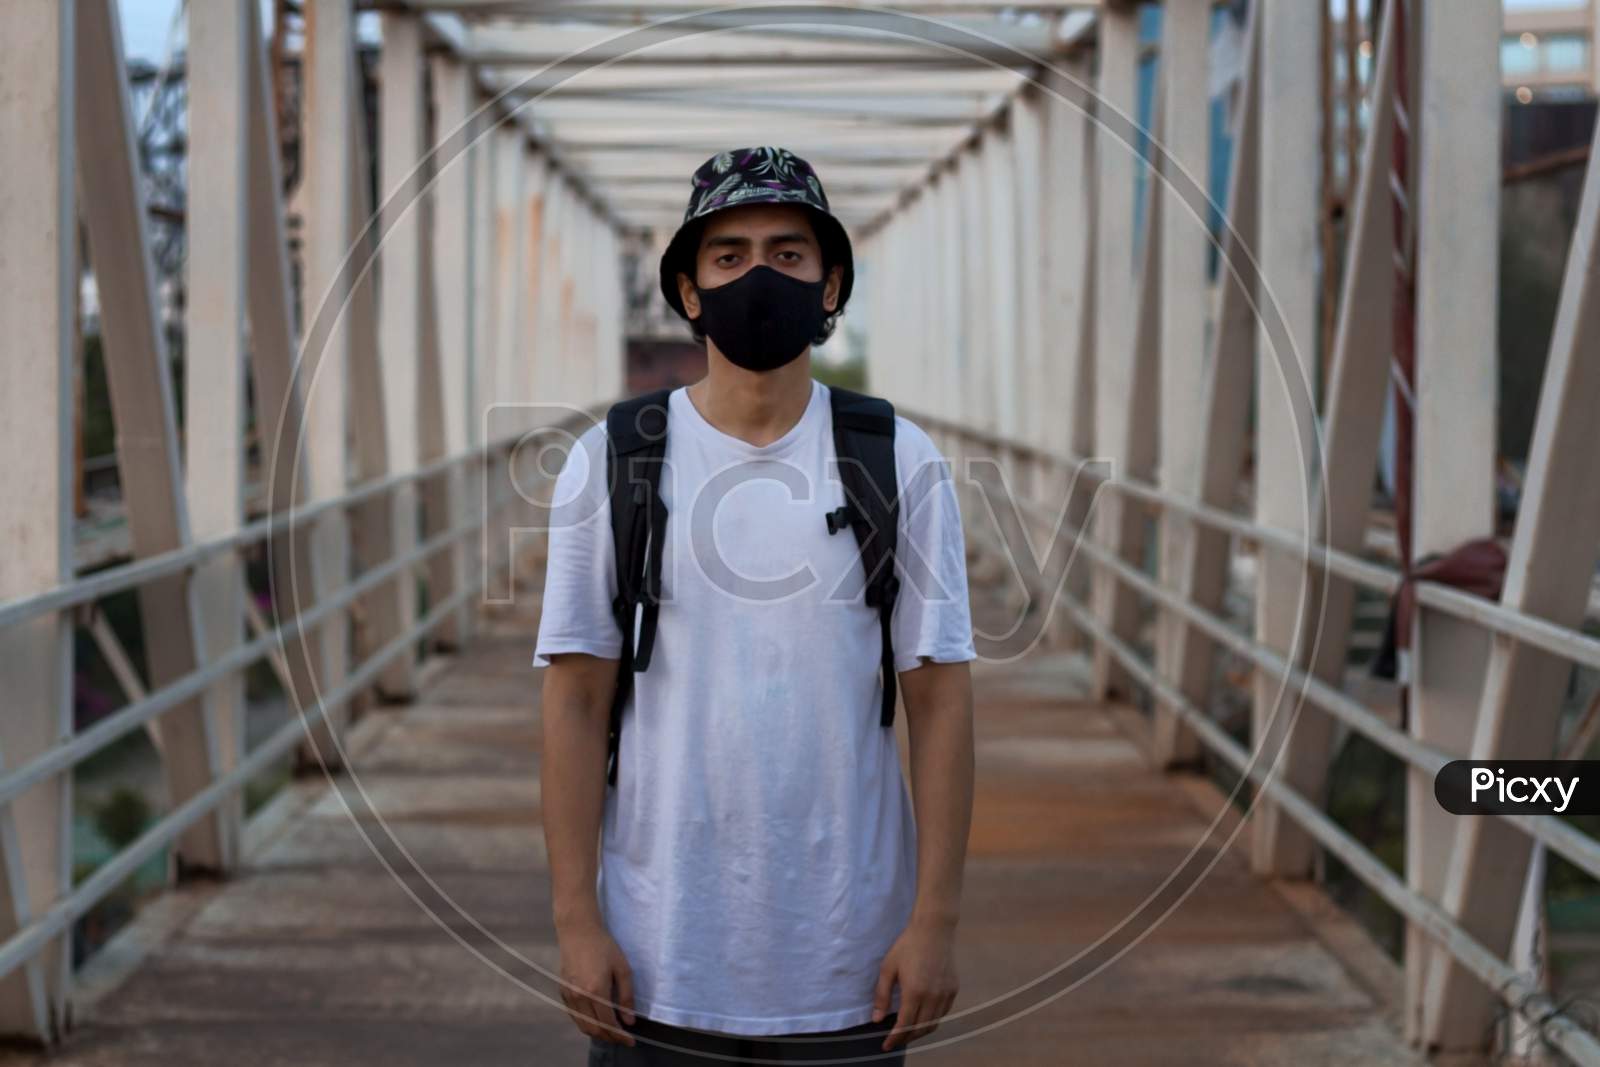 Young Millennial Standing On An Empty Metal Foot Bridge Outdoors While Wearing A Black Protective Face Mask To Prevent Coronavirus Infection In A City. The New Normal.